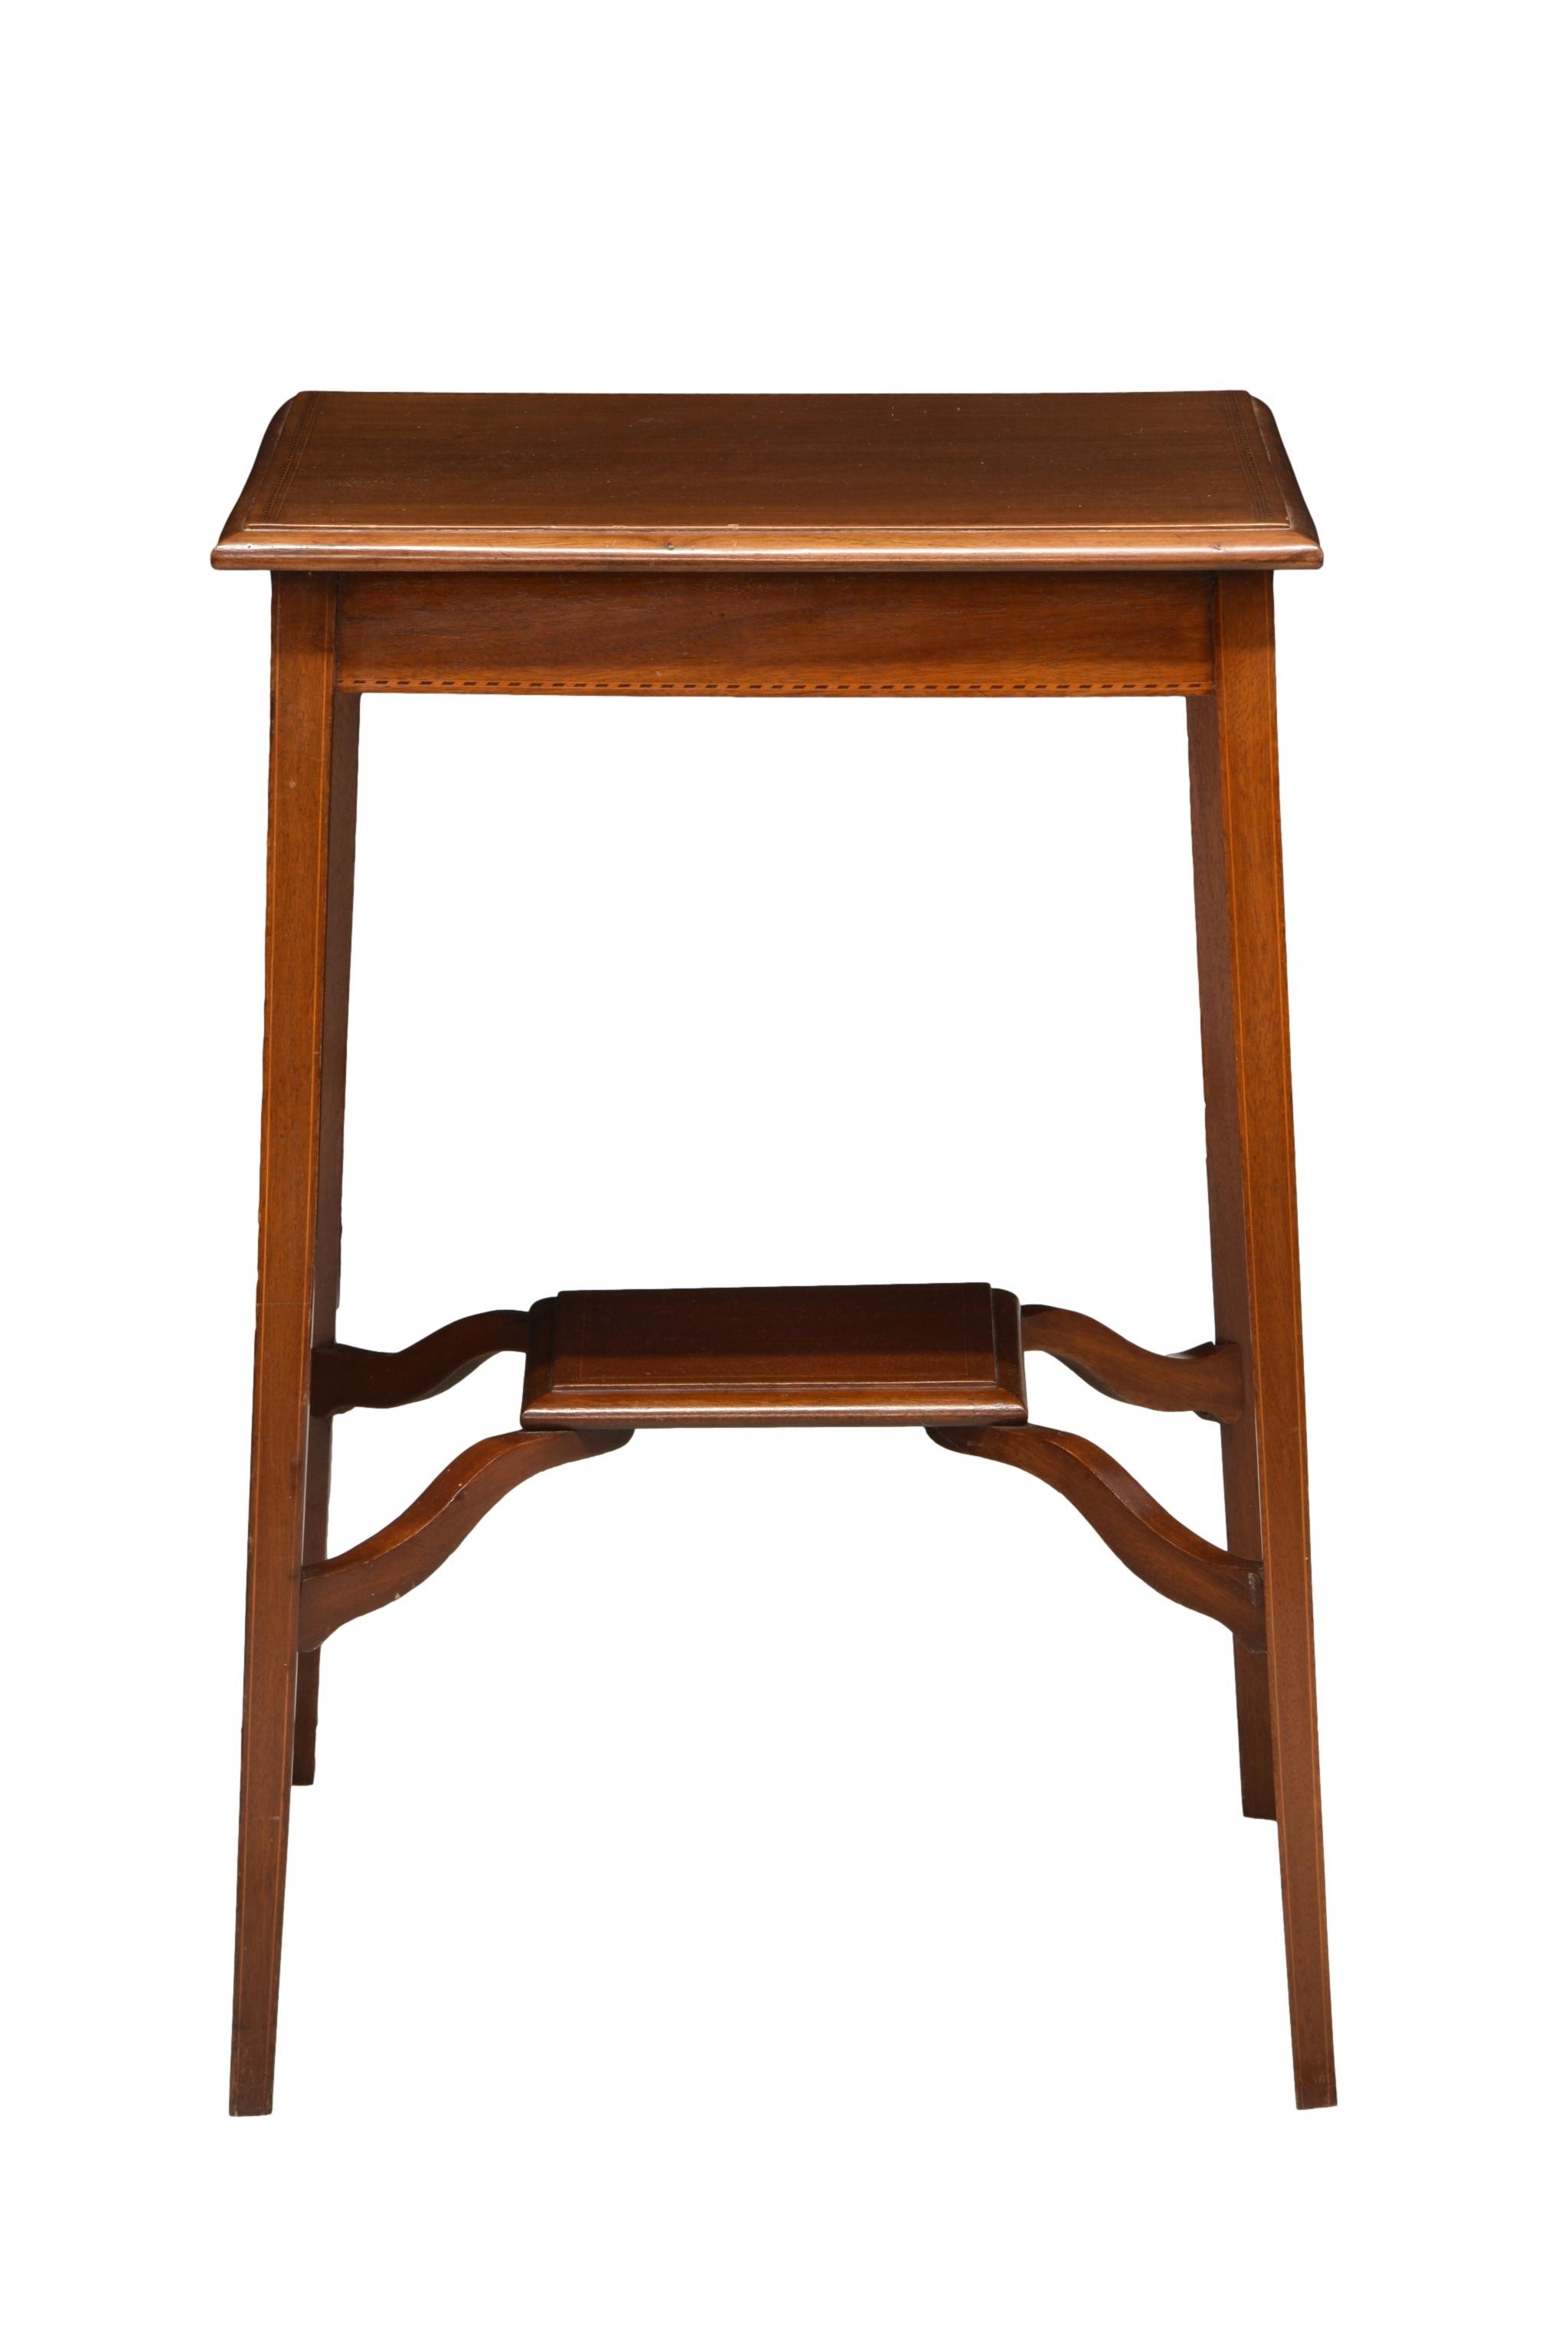 An Edwardian mahogany inlaid occasional table, the square top with barbers pole and boxwood